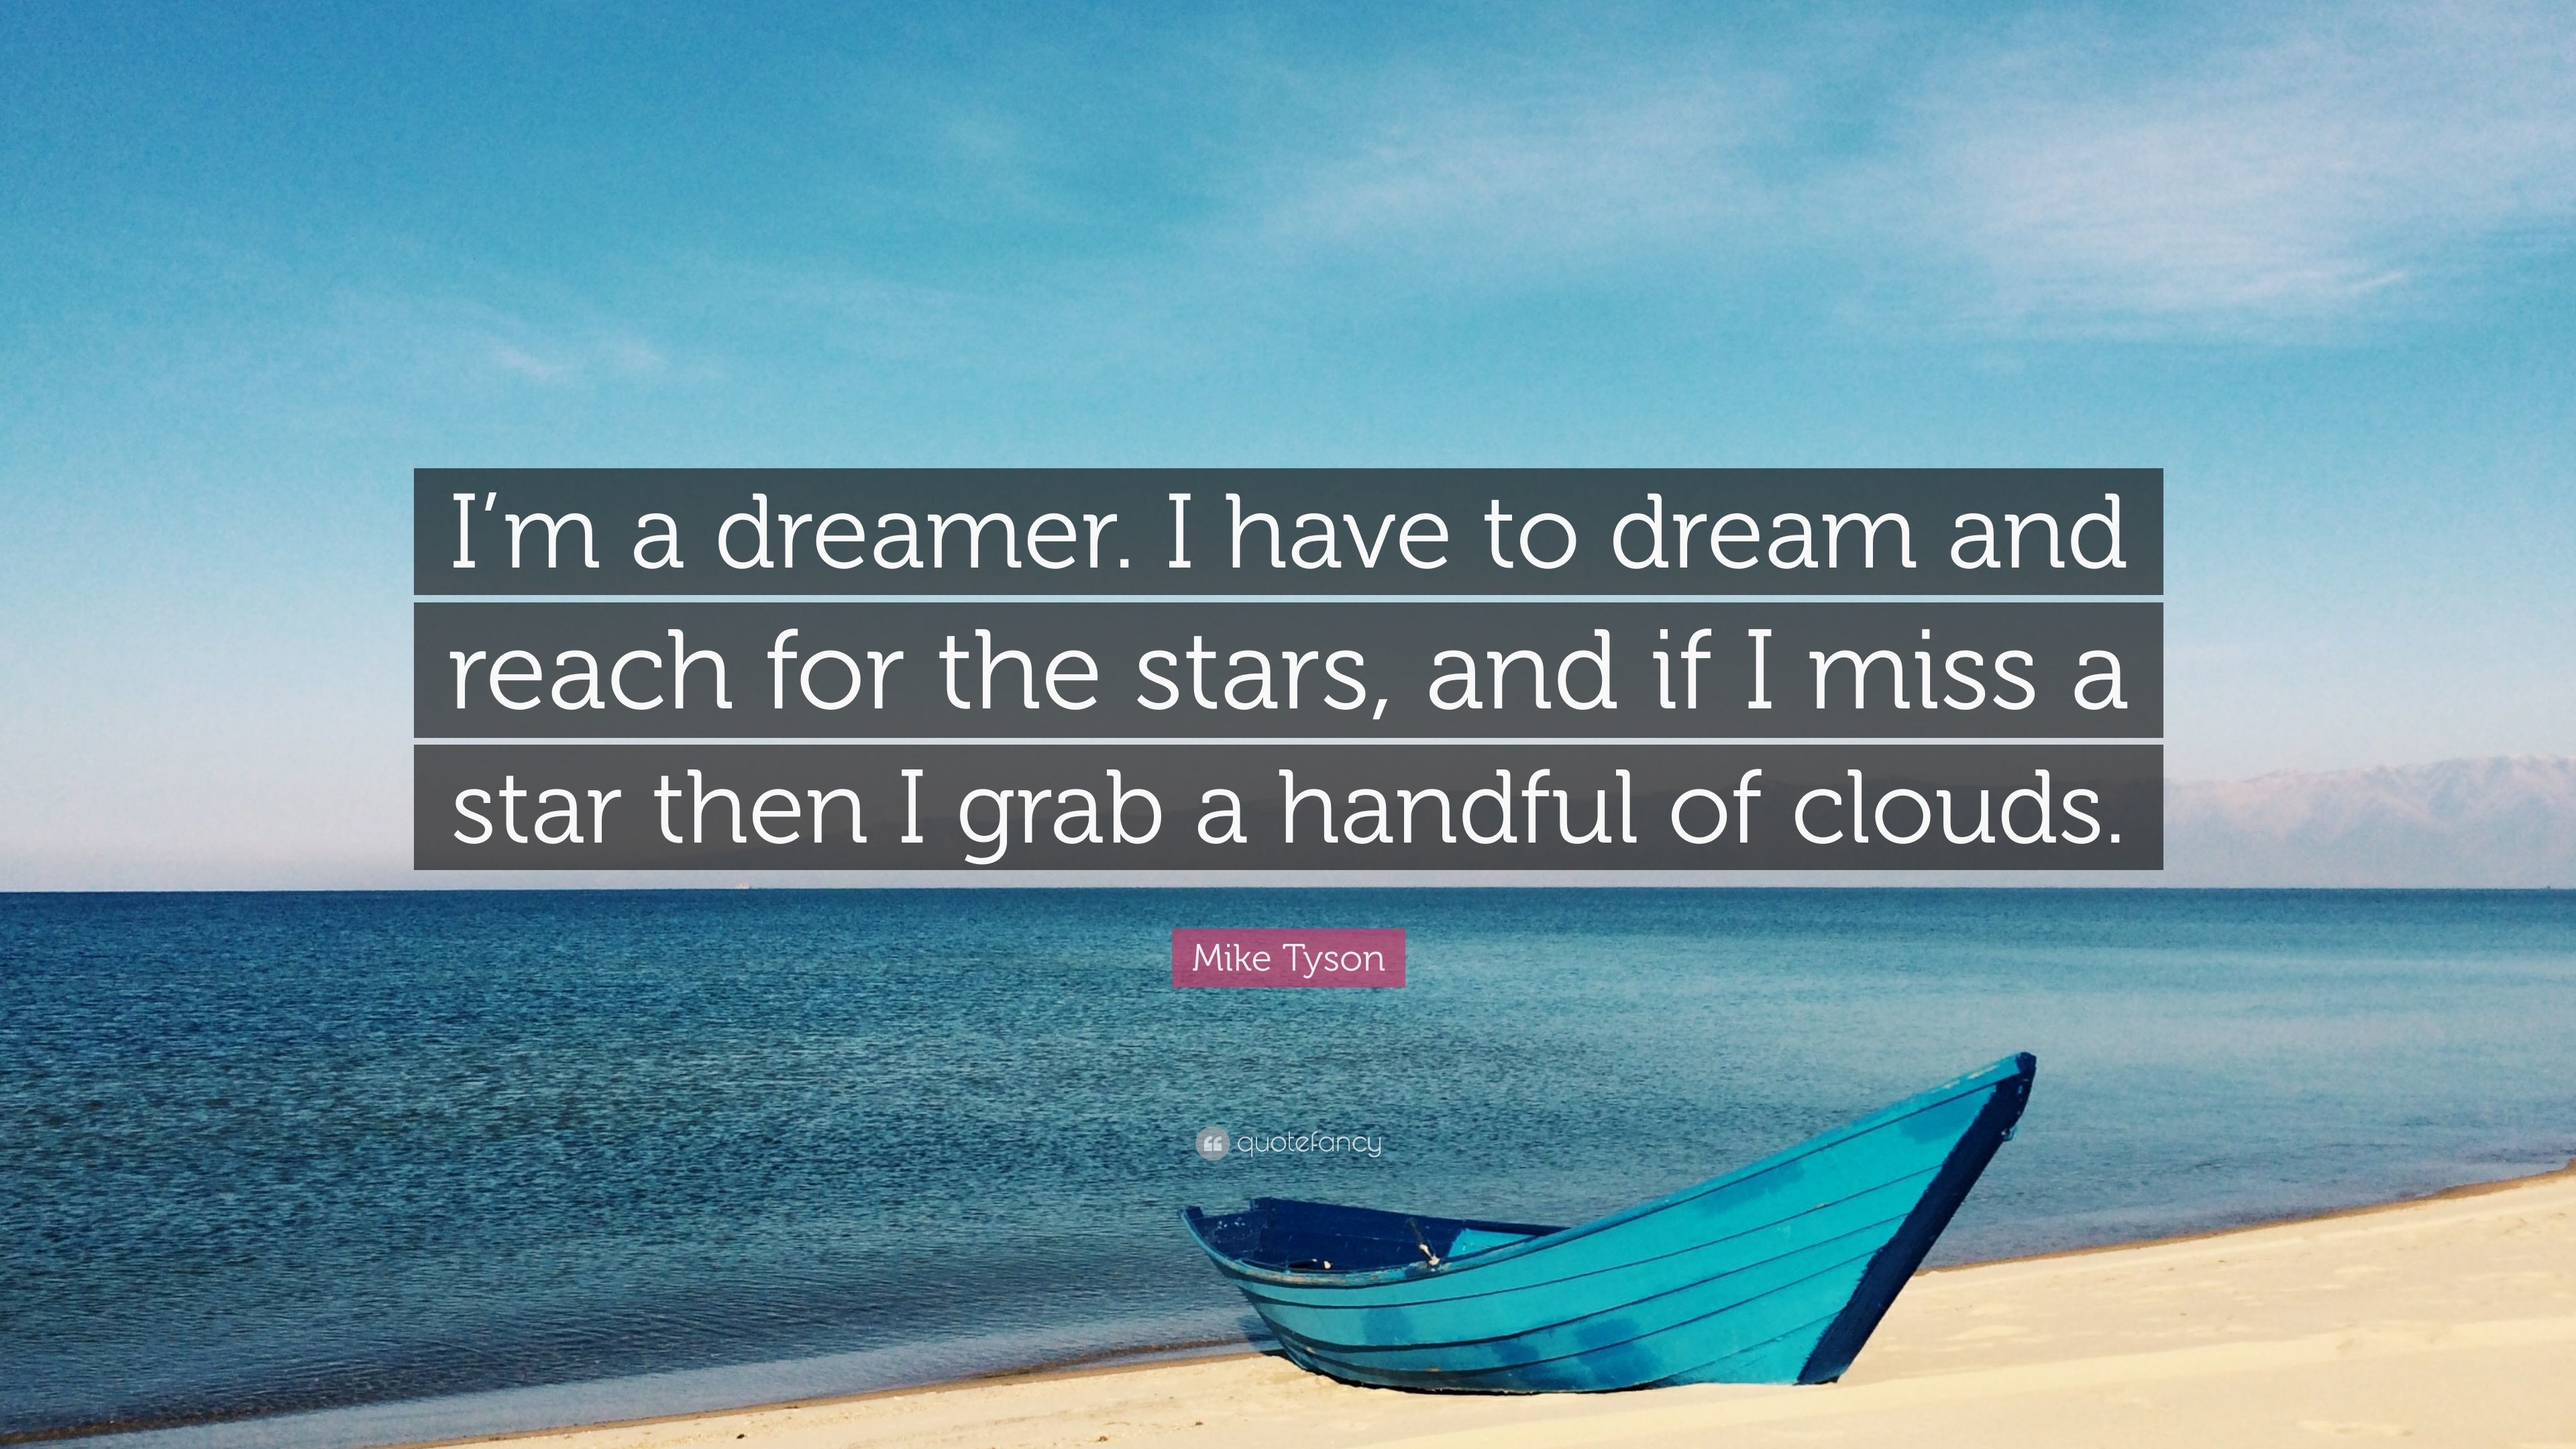 3840x2160 Mike Tyson Quote: “I'm a dreamer. I have to dream and